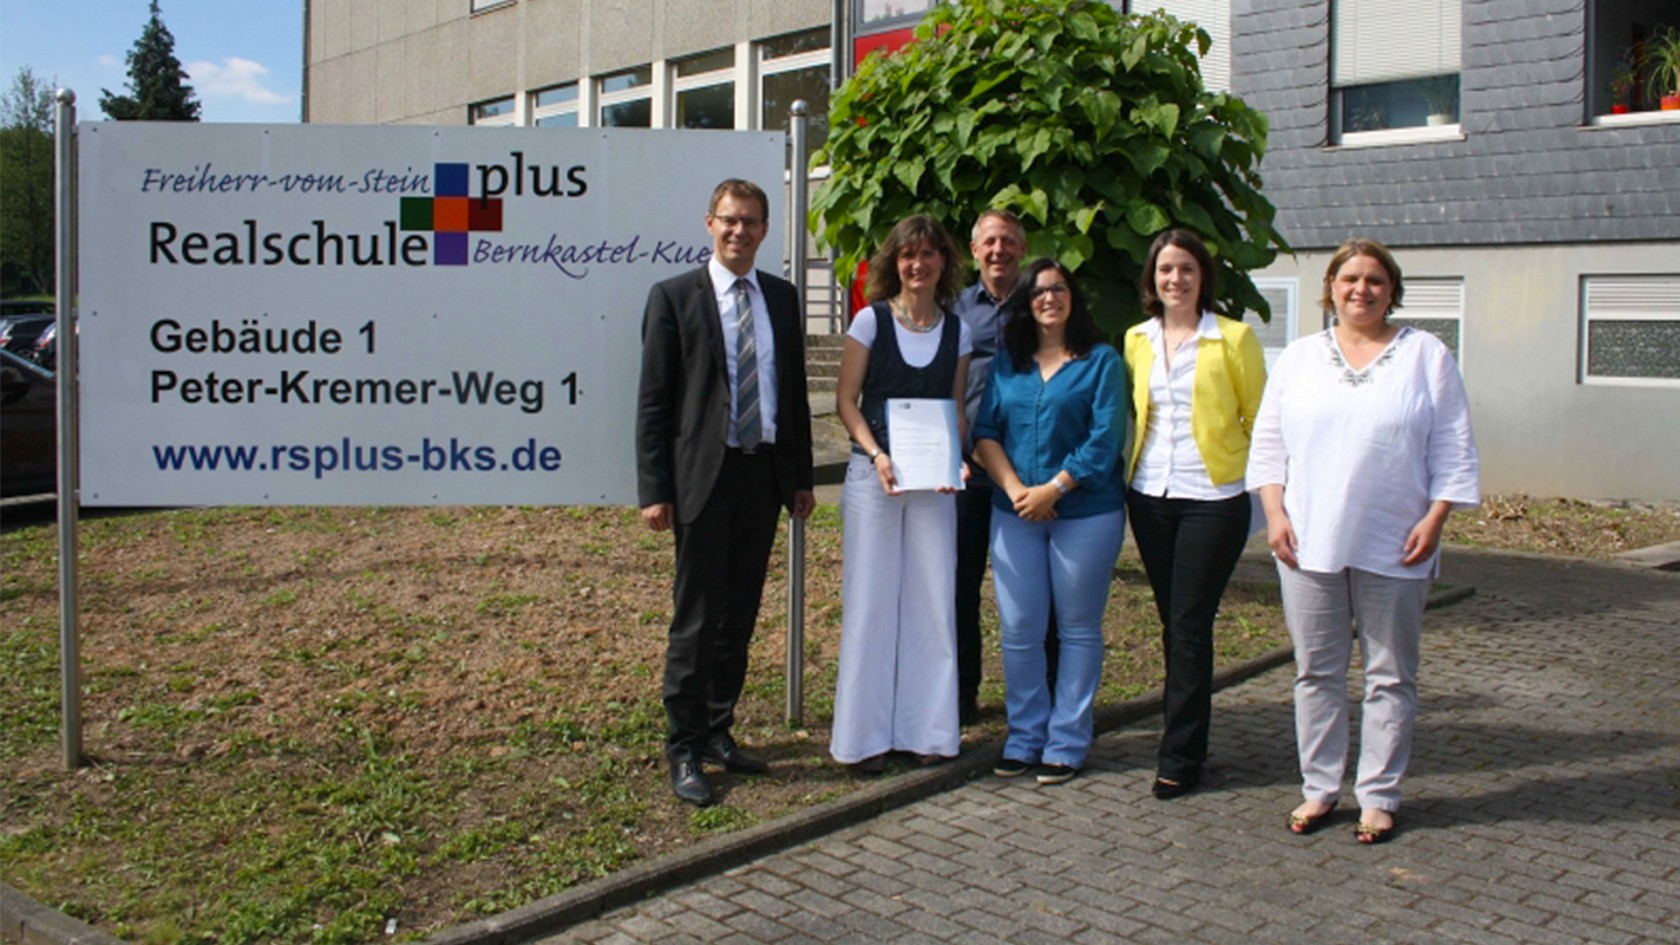 The Realschule plus Bernkastel-Kues and BENNINGHOVEN sign a collaboration agreement.